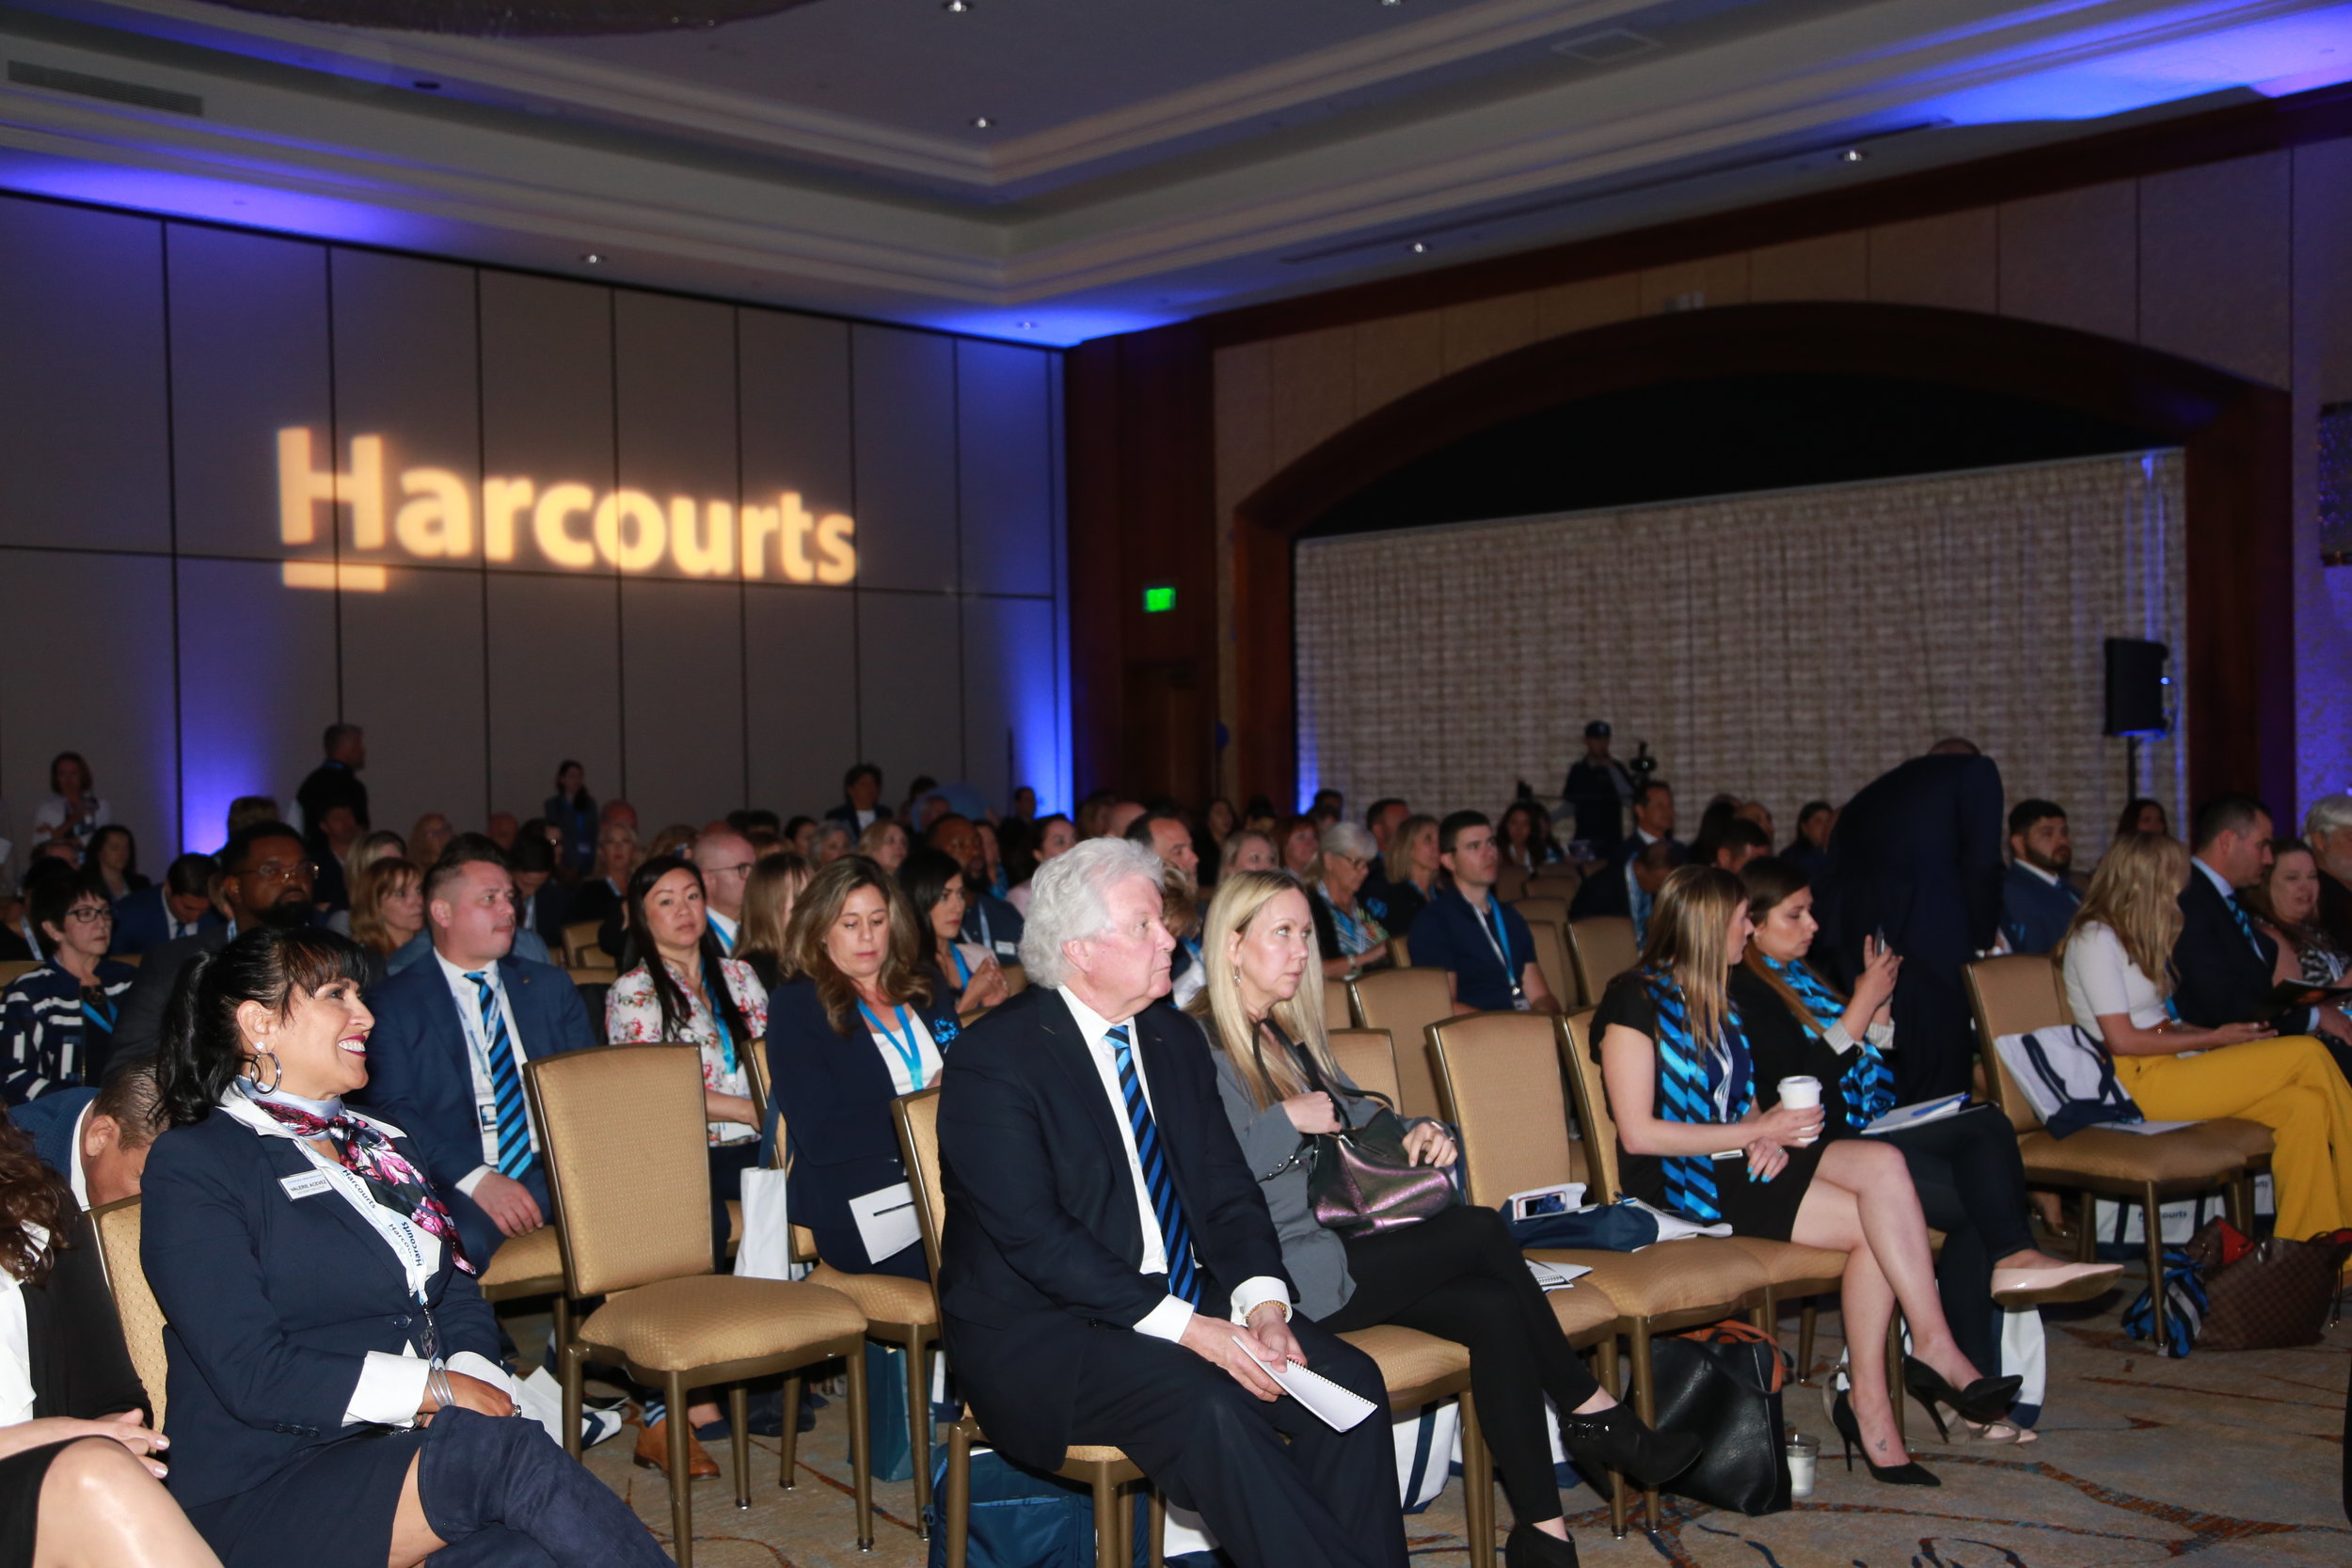 2019-03-26 Harcourts Conference - Day 2 1342.JPG